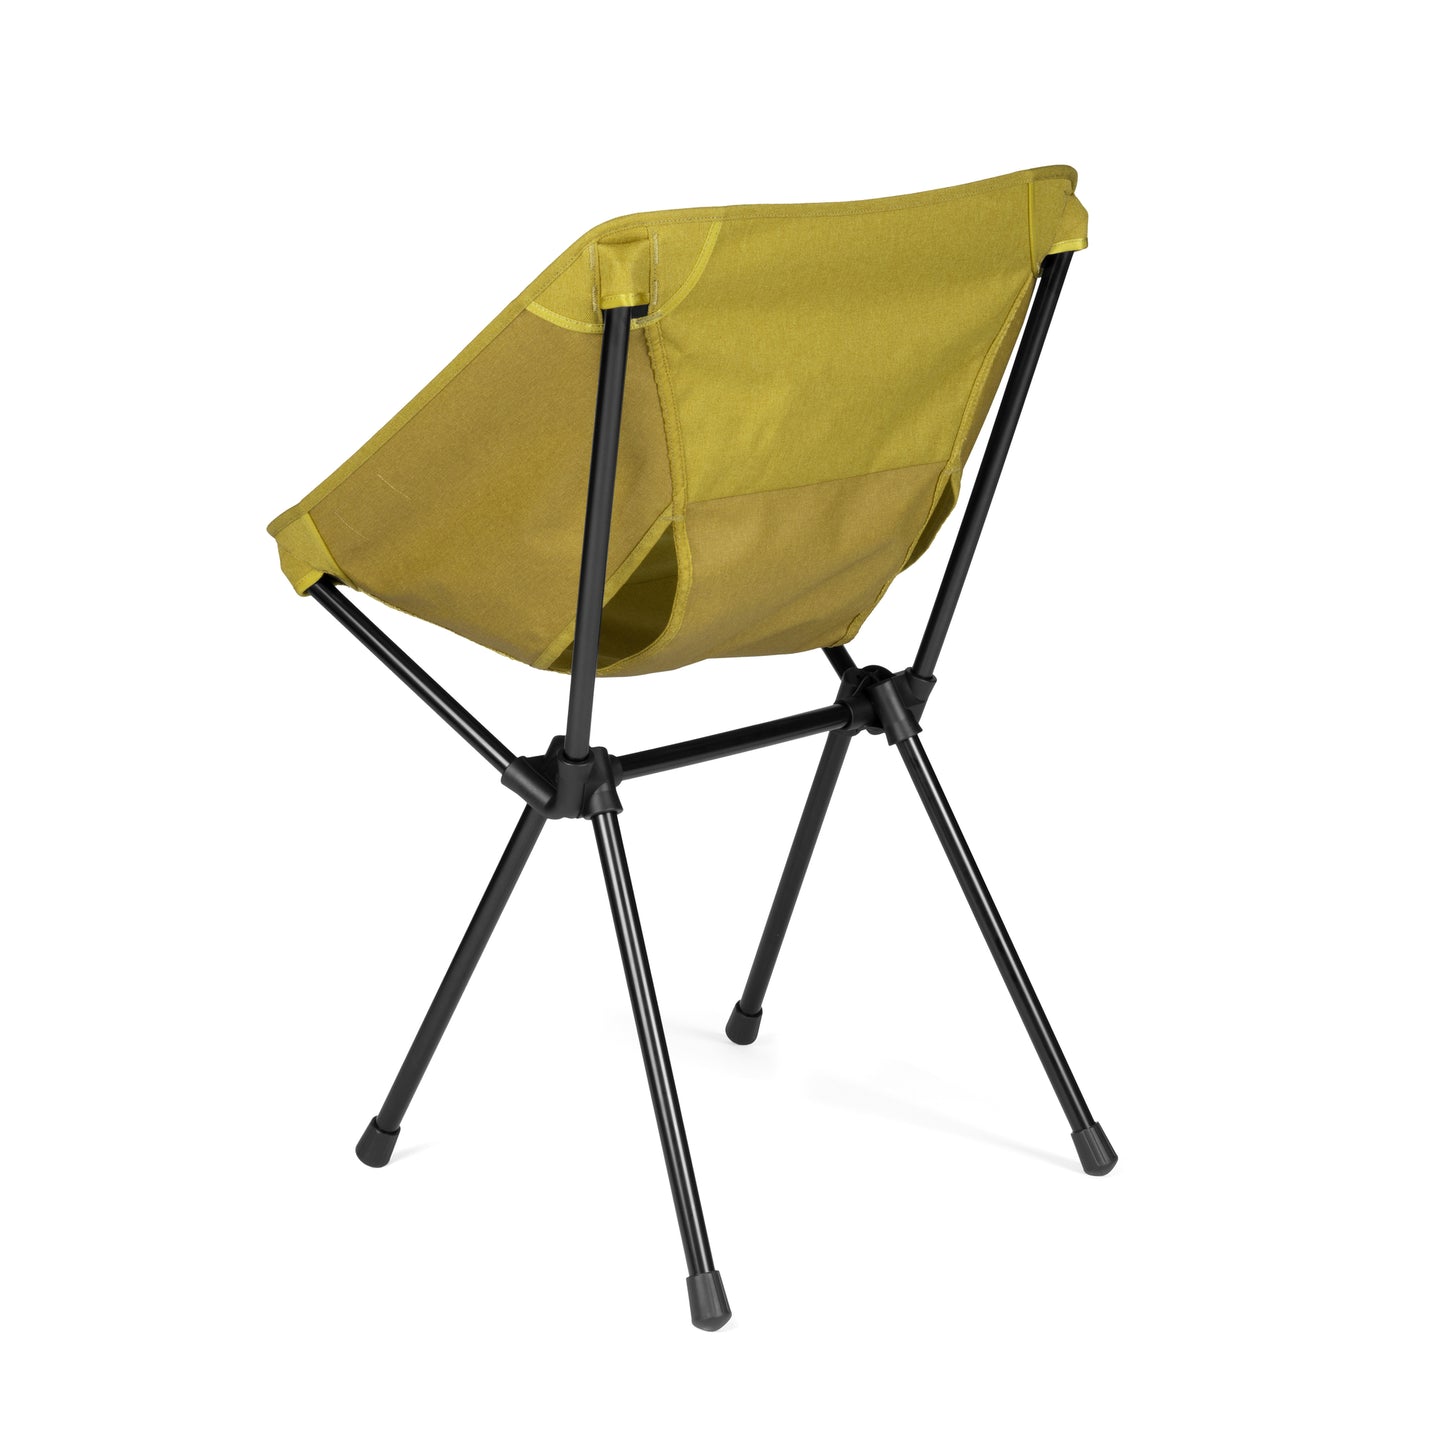 Cafe Chair Home - Mustard